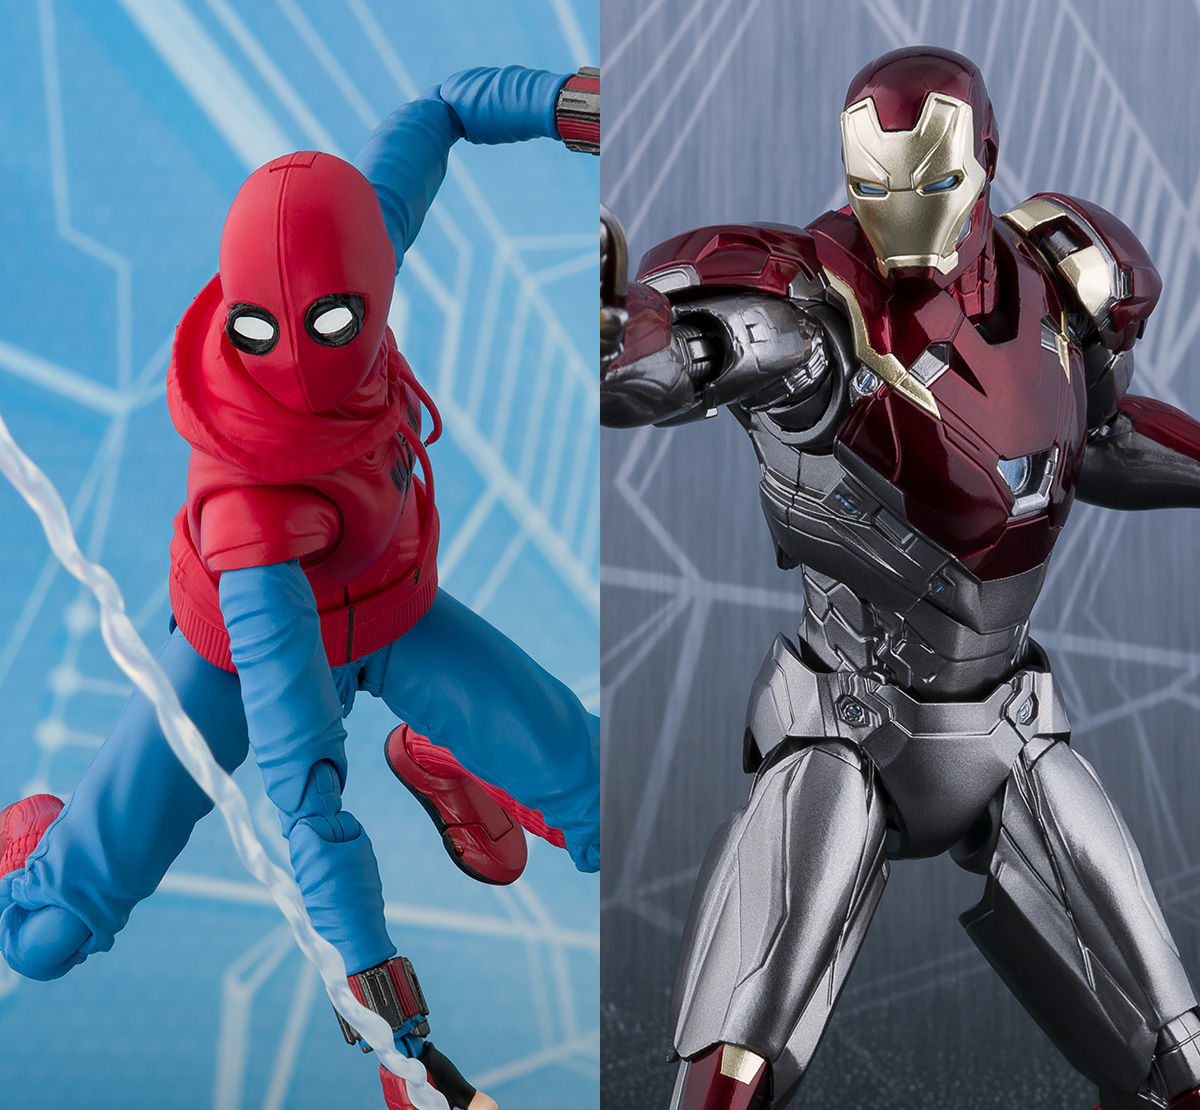 SH Figuarts Homemade Suit Spider-Man & Iron Man Figures! - Marvel Toy News